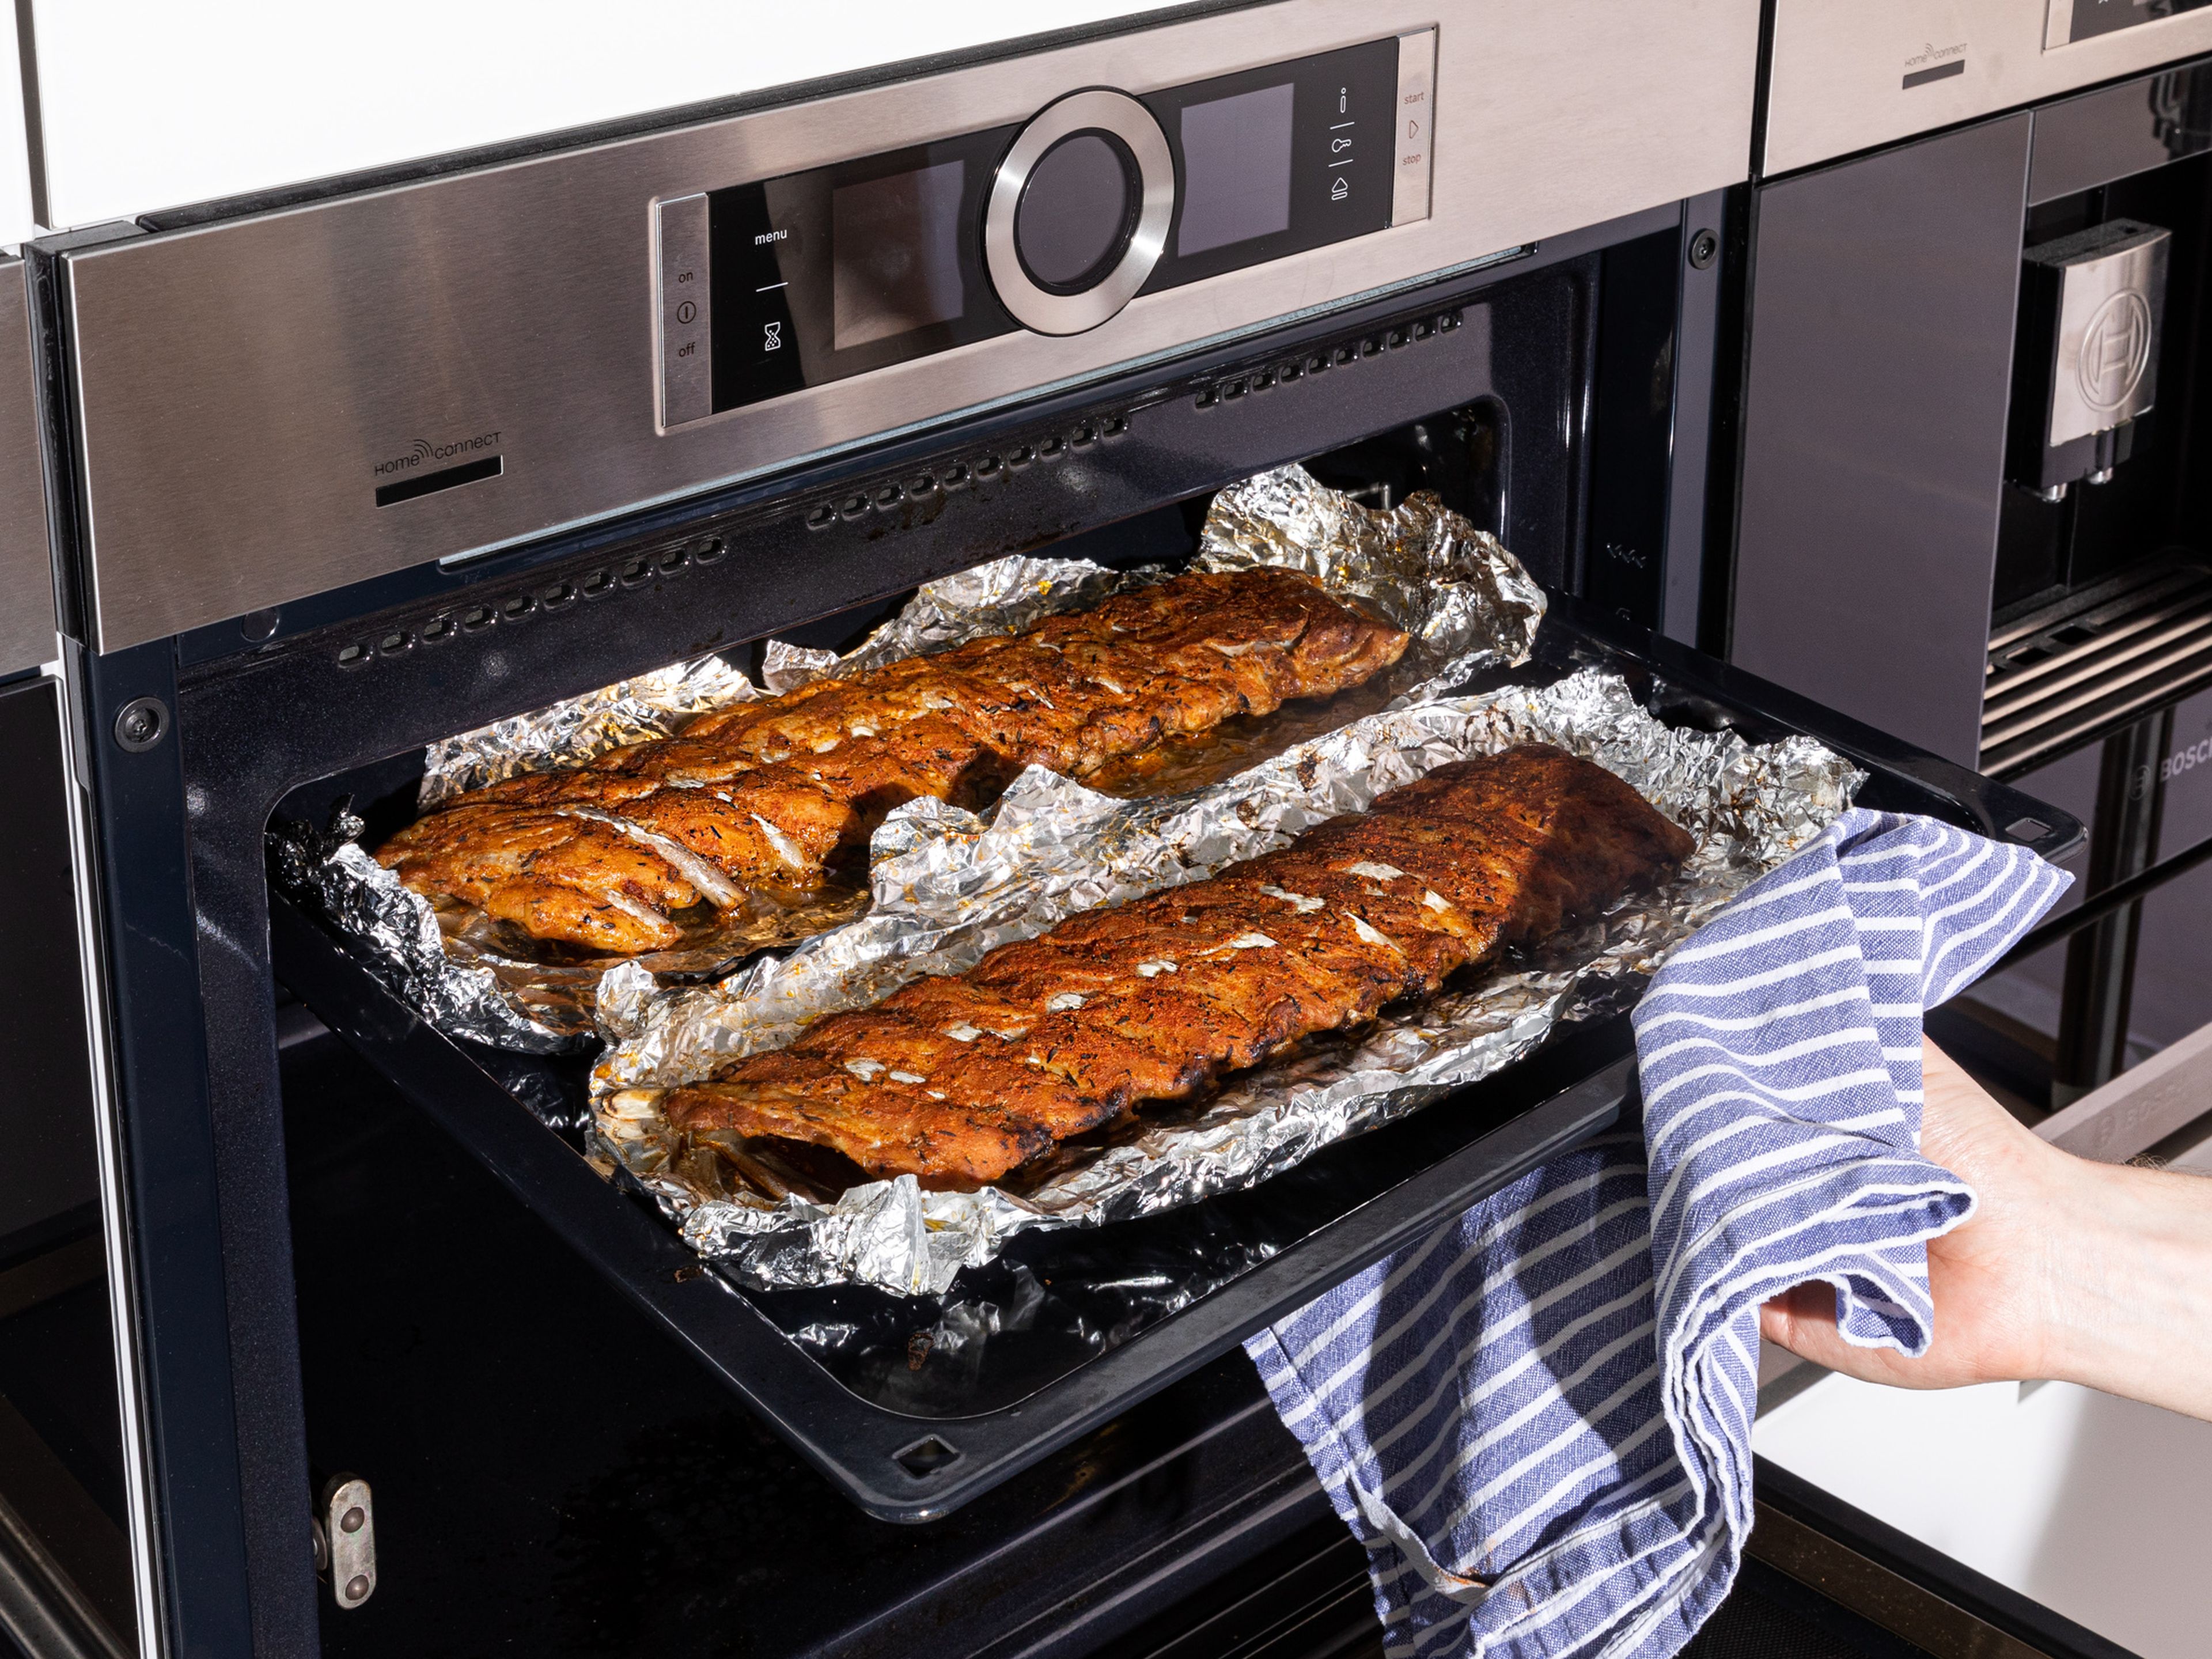 After 2 ½ hrs., remove the ribs from the oven and allow to rest for 15 min. In the meantime, heat the oven up to 220°C /430°F top/bottom heat. After the resting time, open the ribs package and pour out the excess liquid into a bowl. Then turn the ribs over, so that the meaty side is facing up. Remove any excess foil, and then return the ribs to the oven with the baking sheet on the highest shelf (as near to the heating element as possible) and bake for approx. 5 min., so a crust forms on the meat.